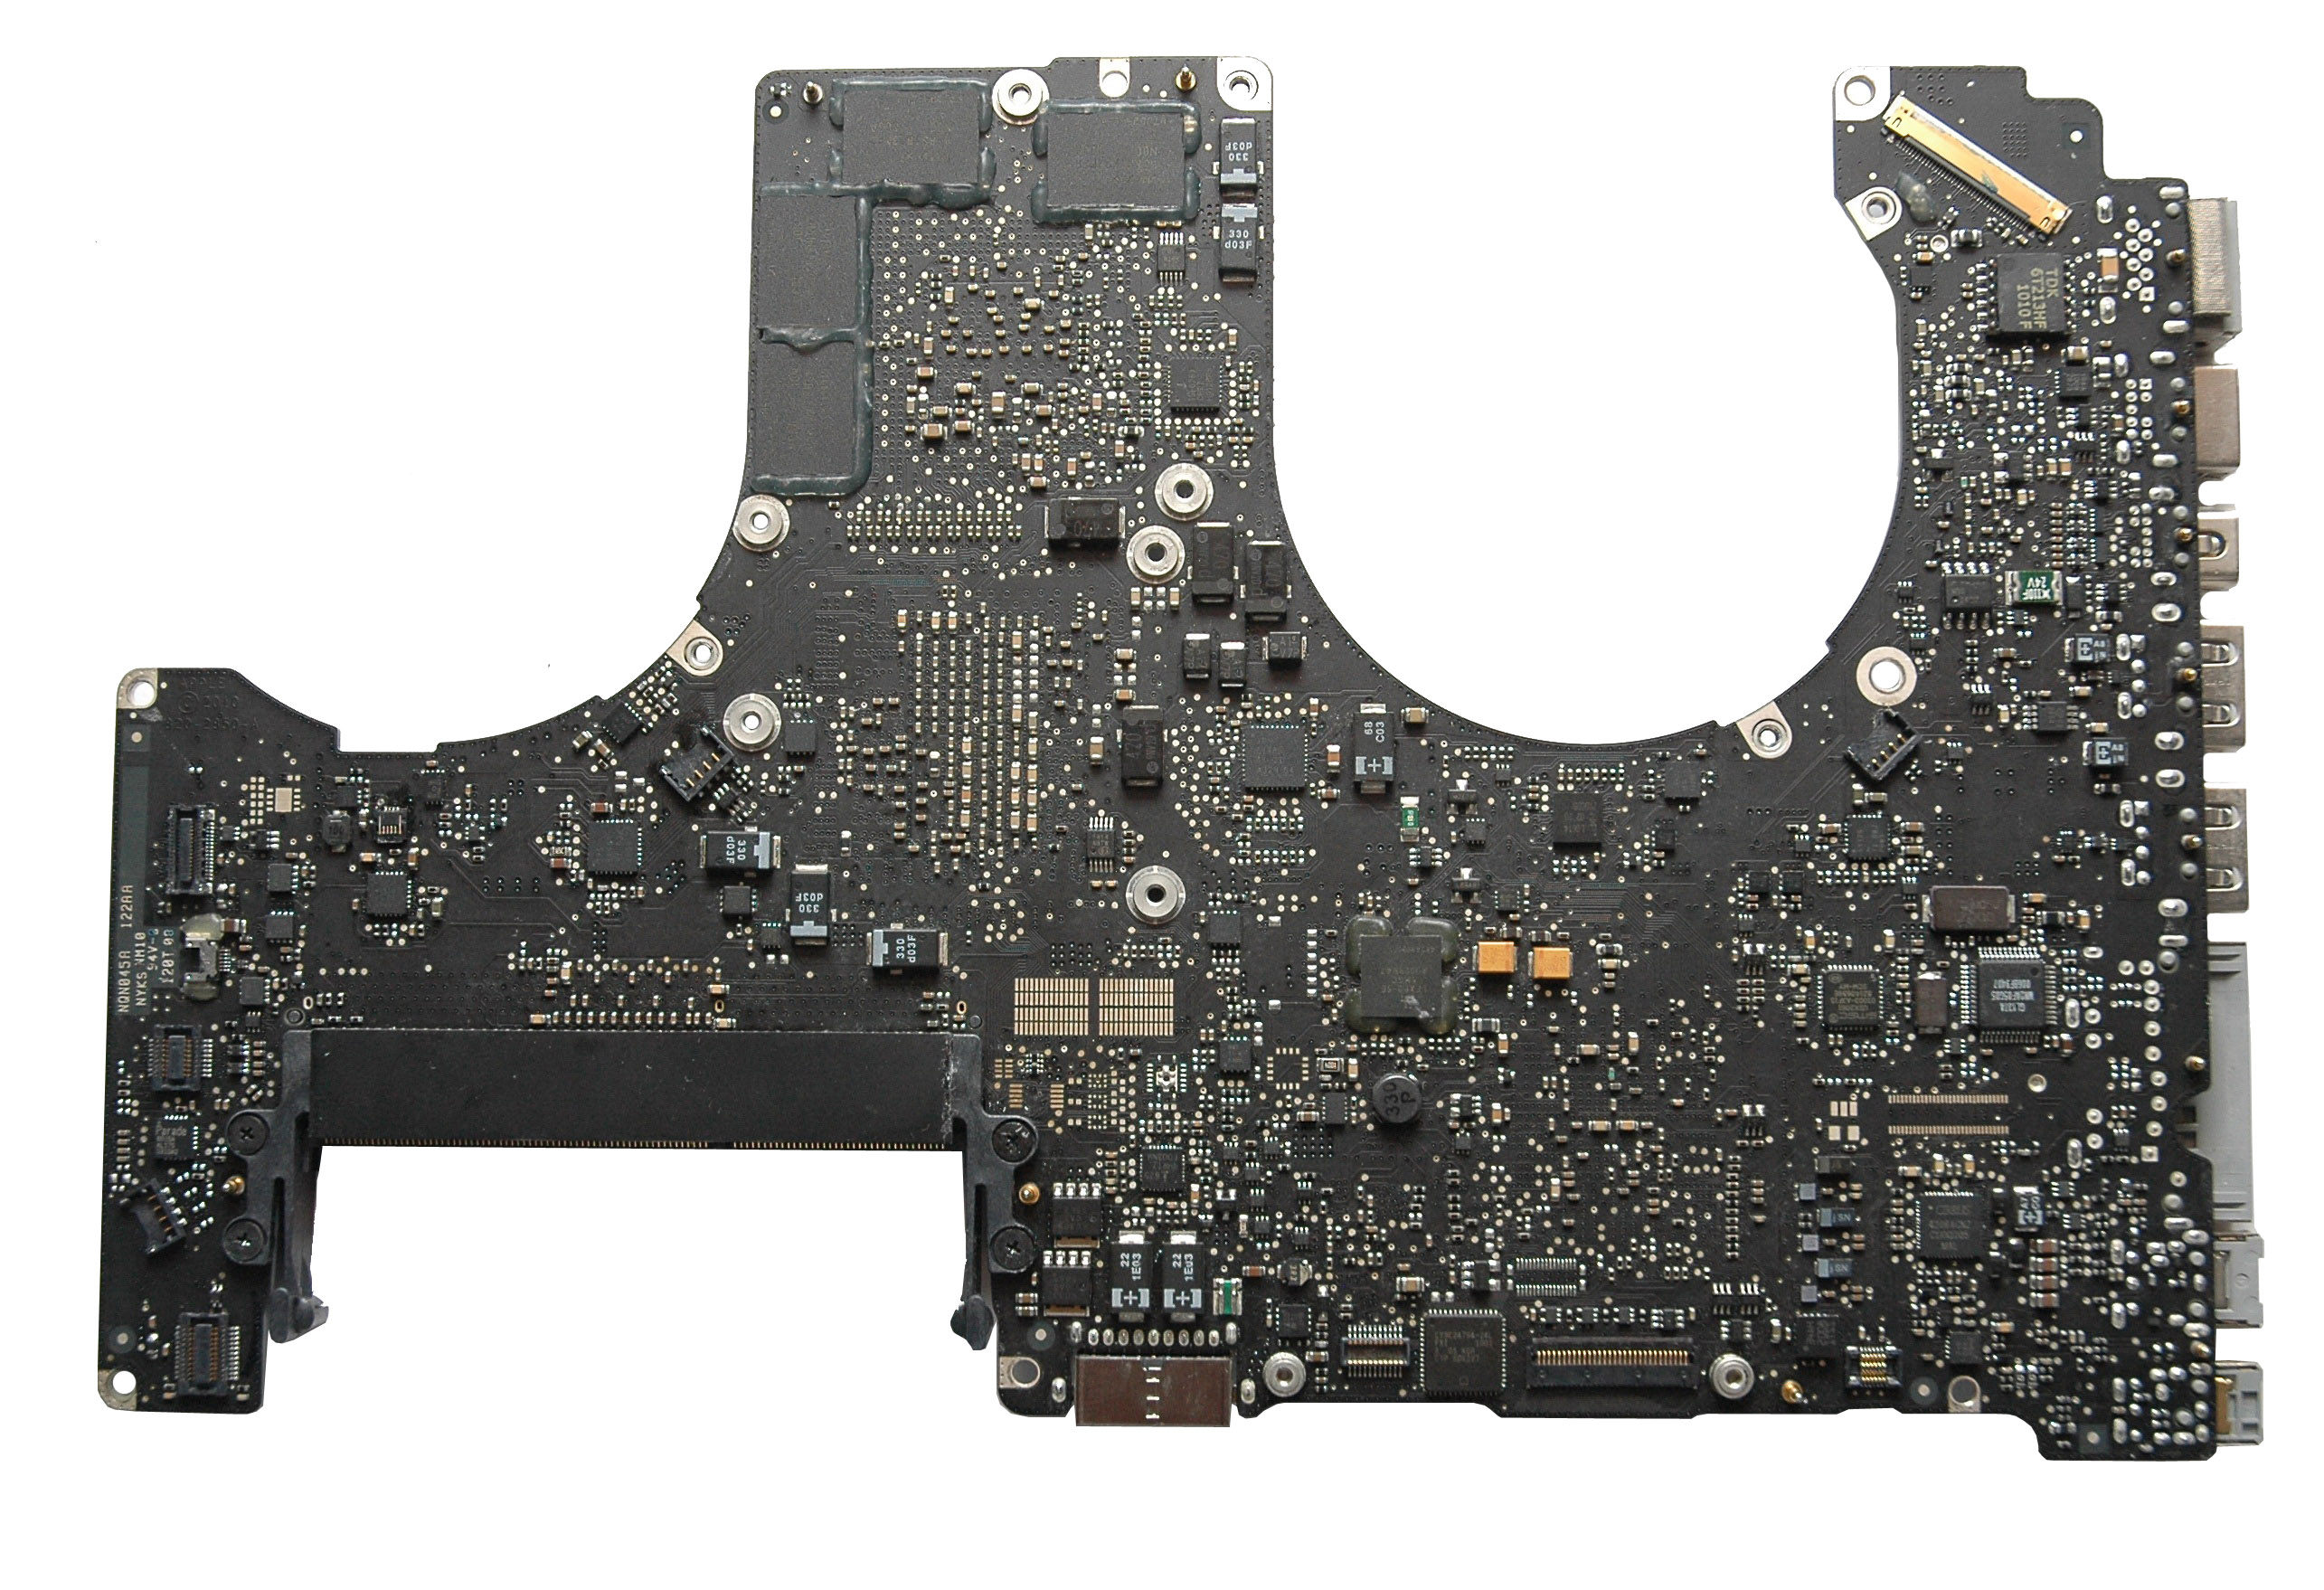 820-2850-A Apple System Board (Motherboard) for 2.53GHz Logic Board for MacBook Pro 15-Inch Mid 2010 All-In-One (Refurbished)